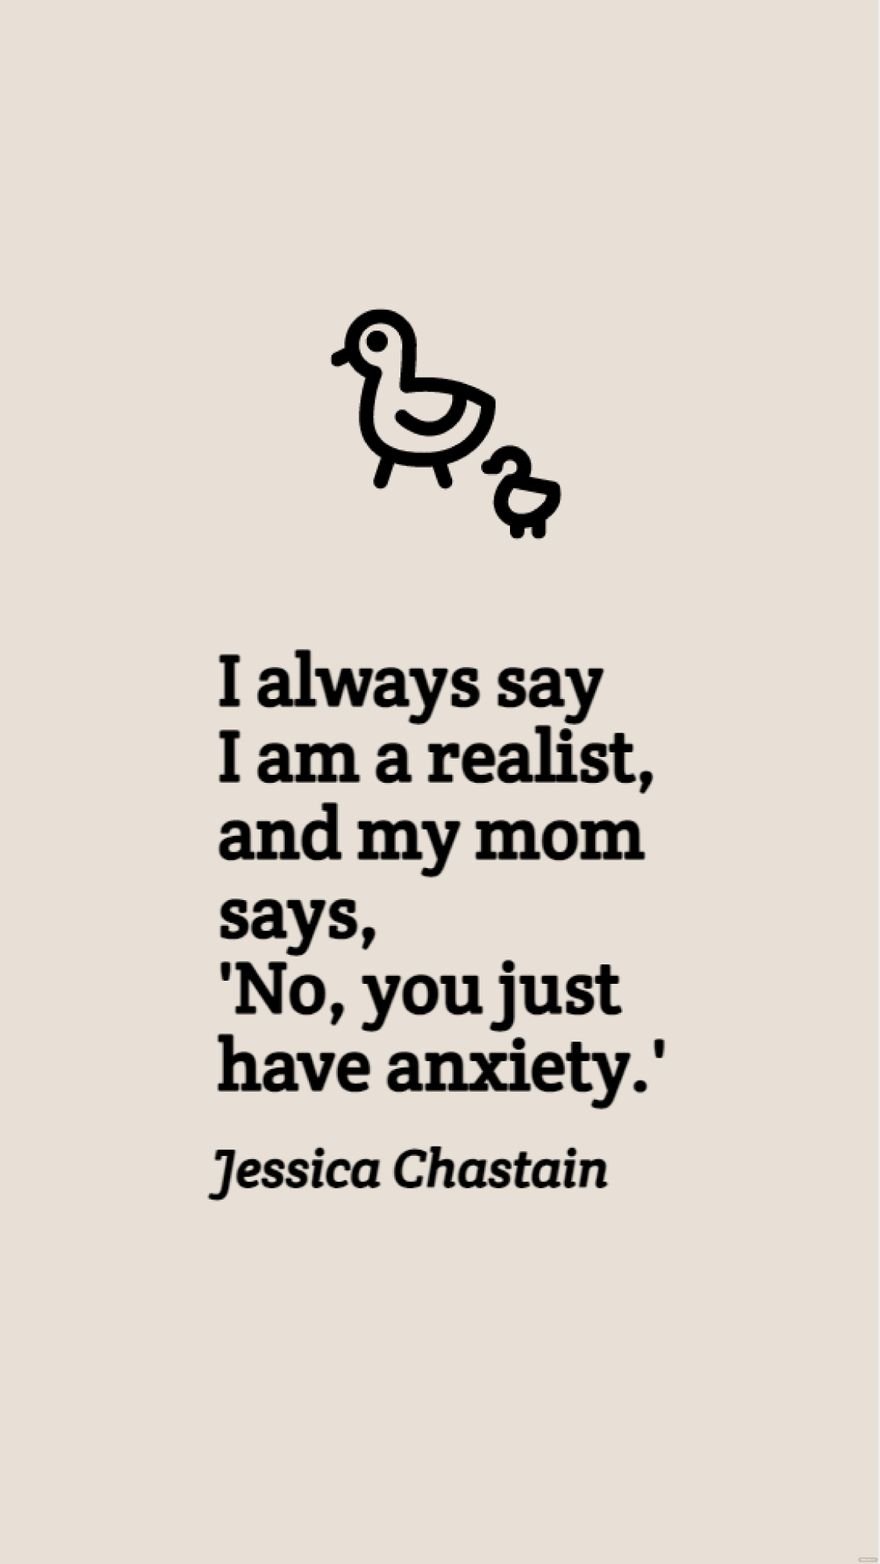 Free Jessica Chastain - I always say I am a realist, and my mom says, 'No, you just have anxiety.'